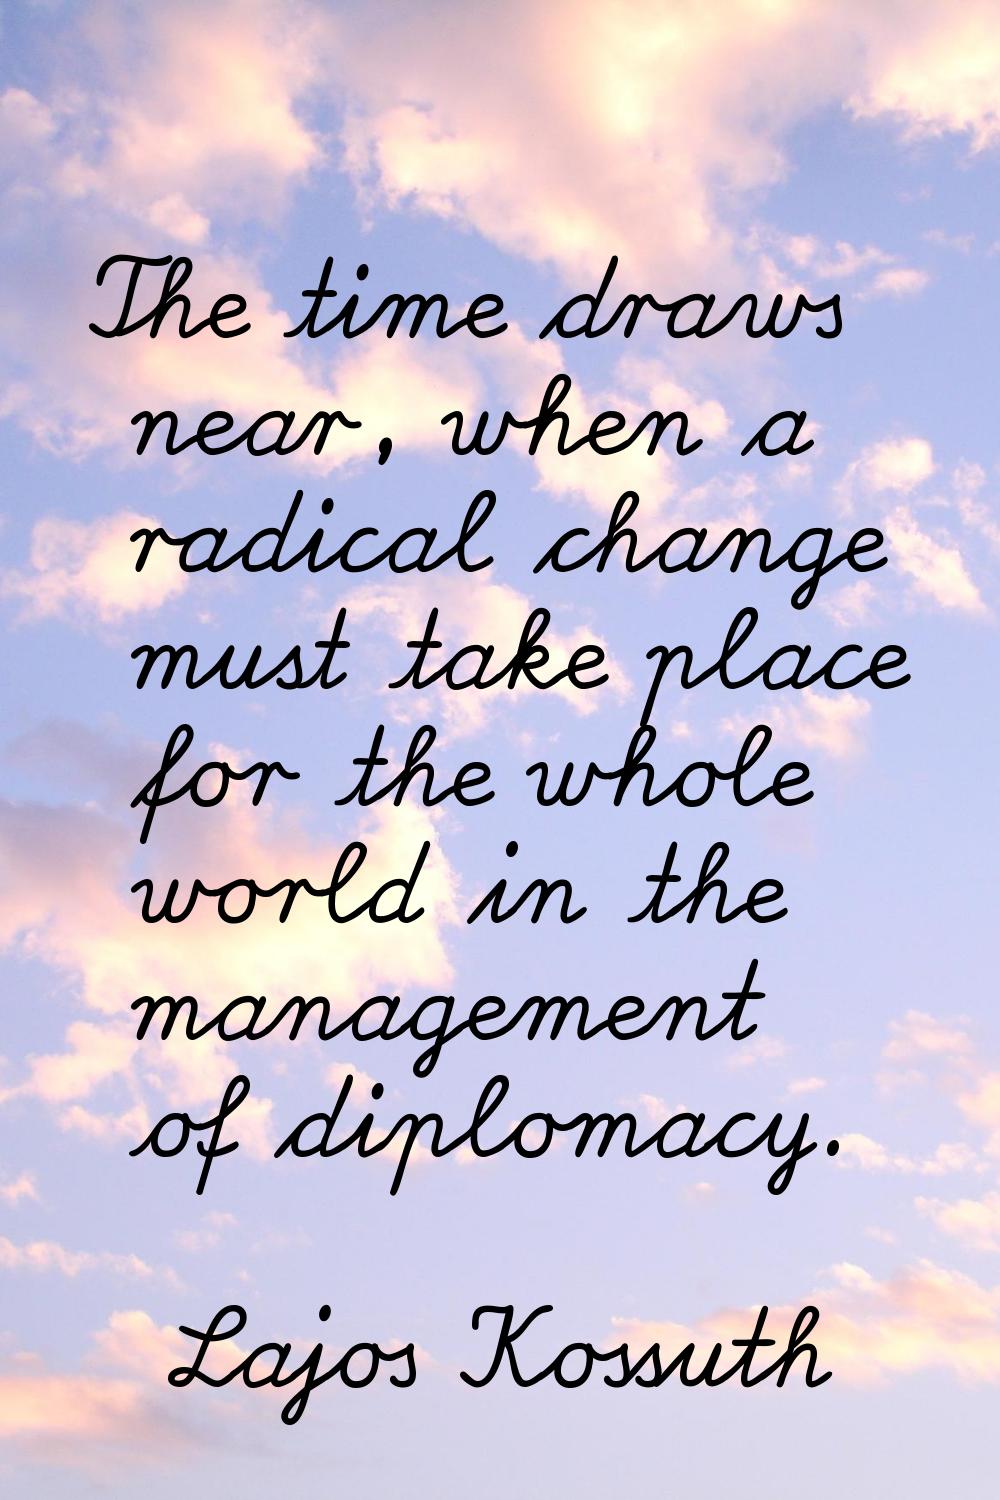 The time draws near, when a radical change must take place for the whole world in the management of